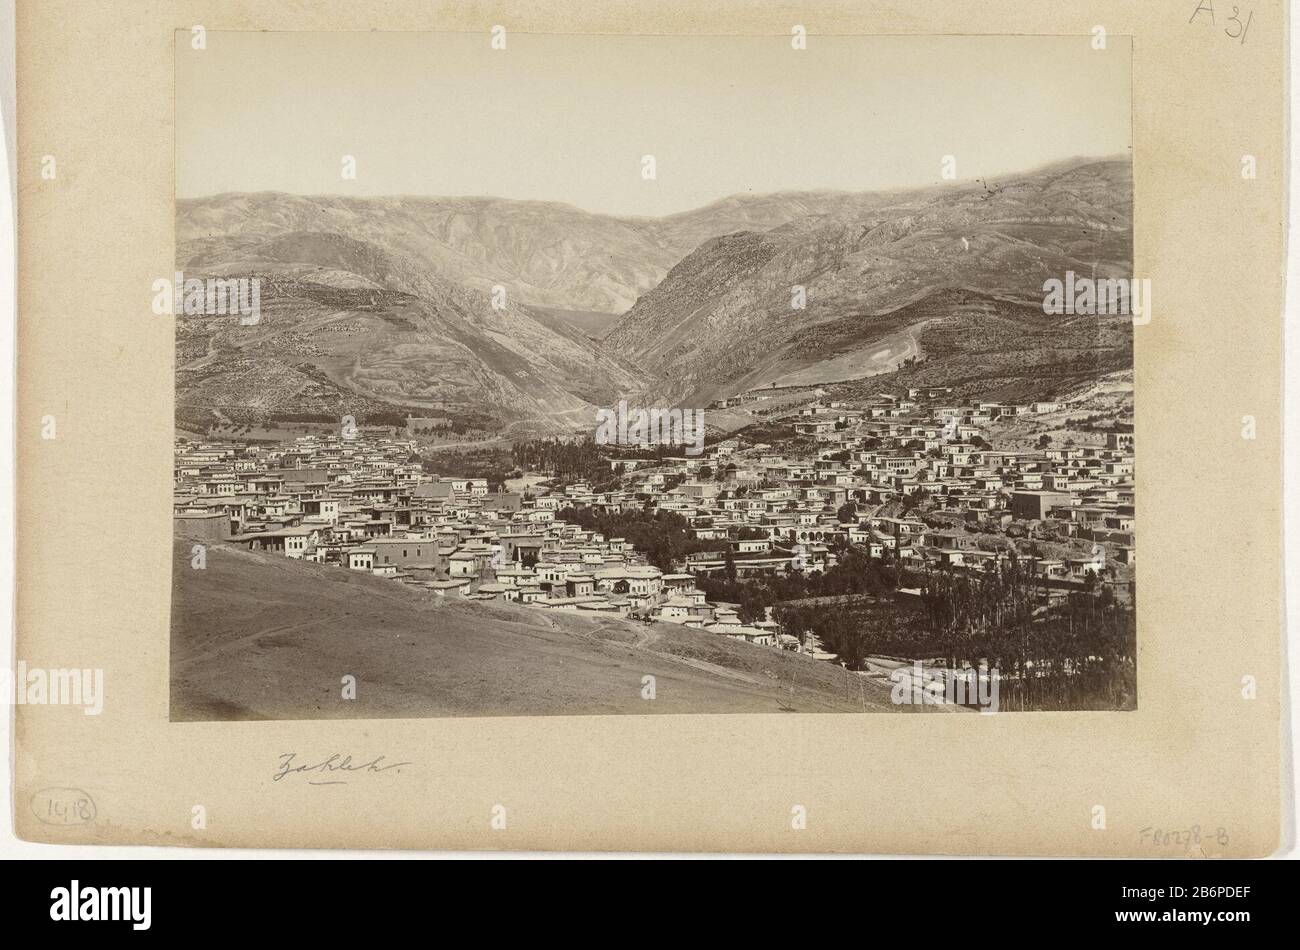 Gezicht op Zahle in Libanon Zahleh (titel op object) View of Zahle LibanonZahleh (title object) Property Type: photographs number: RP-F-F80278-B Inscriptions / Brands: annotation, recto of leaf, wrote: "Anon ...